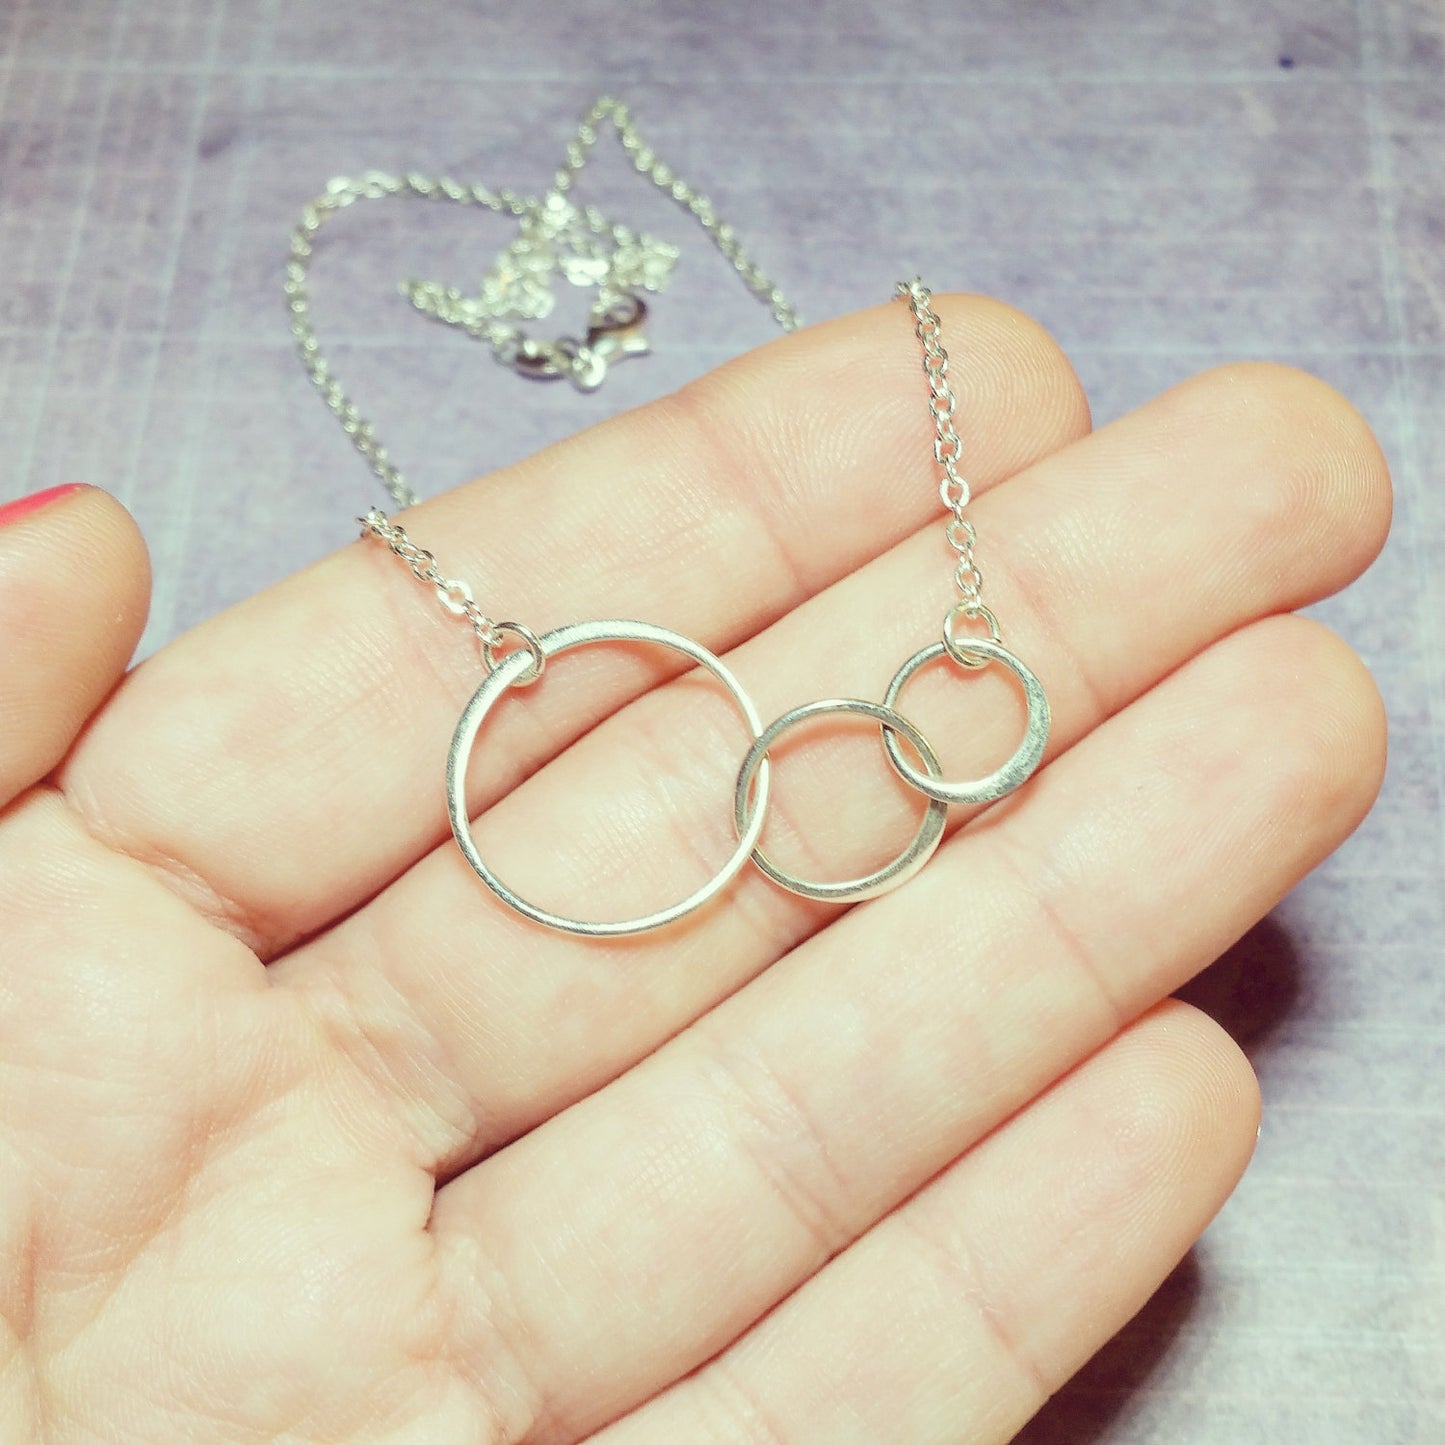 Three Links Sterling Silver Necklace